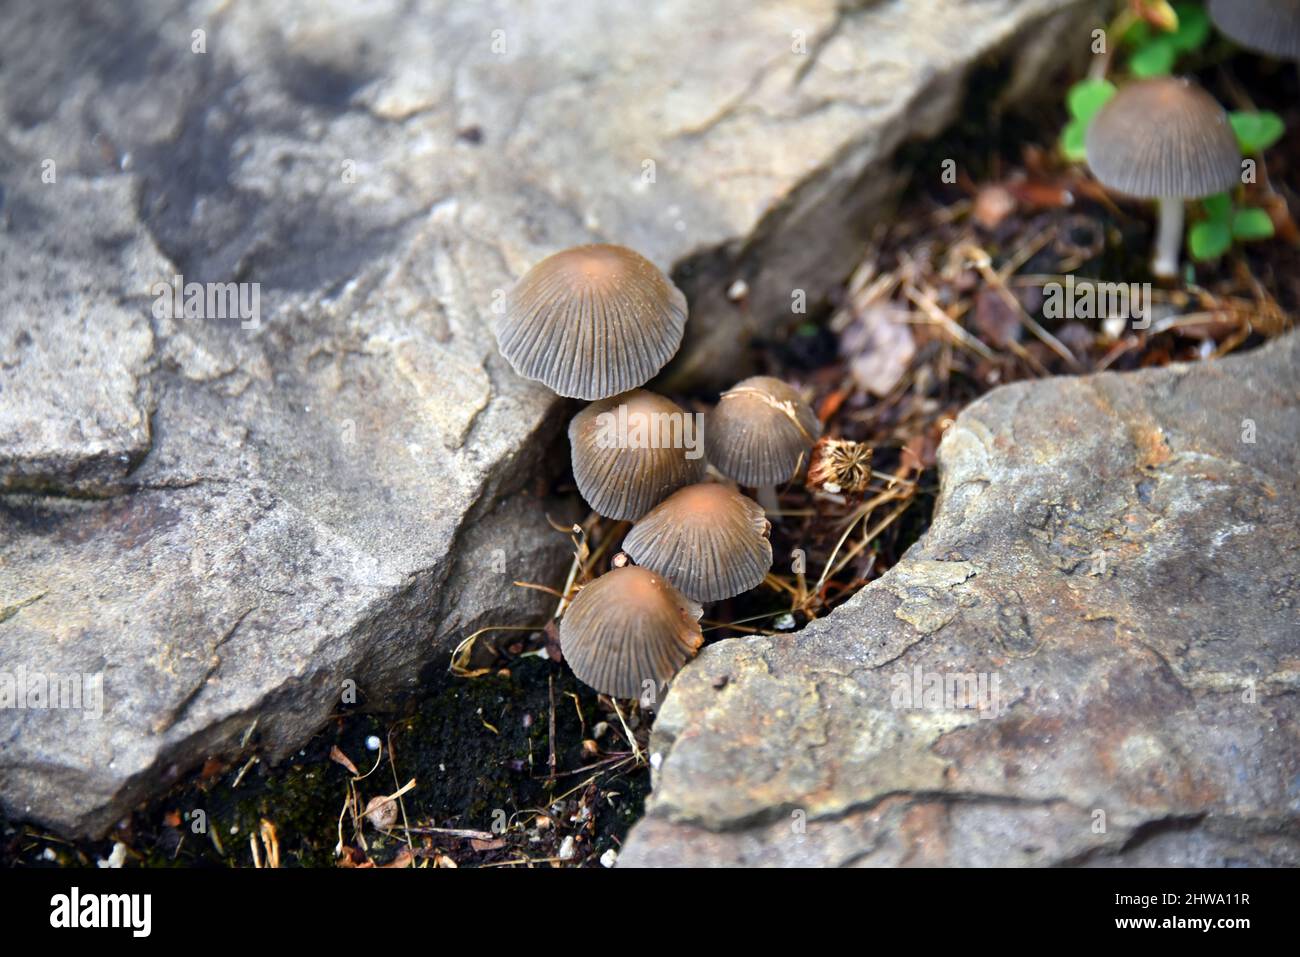 Tiny mushrooms sprout in the dirt between a crack in the sidewalk.  Cluster of brown mushroom caps cling to the soil. Stock Photo